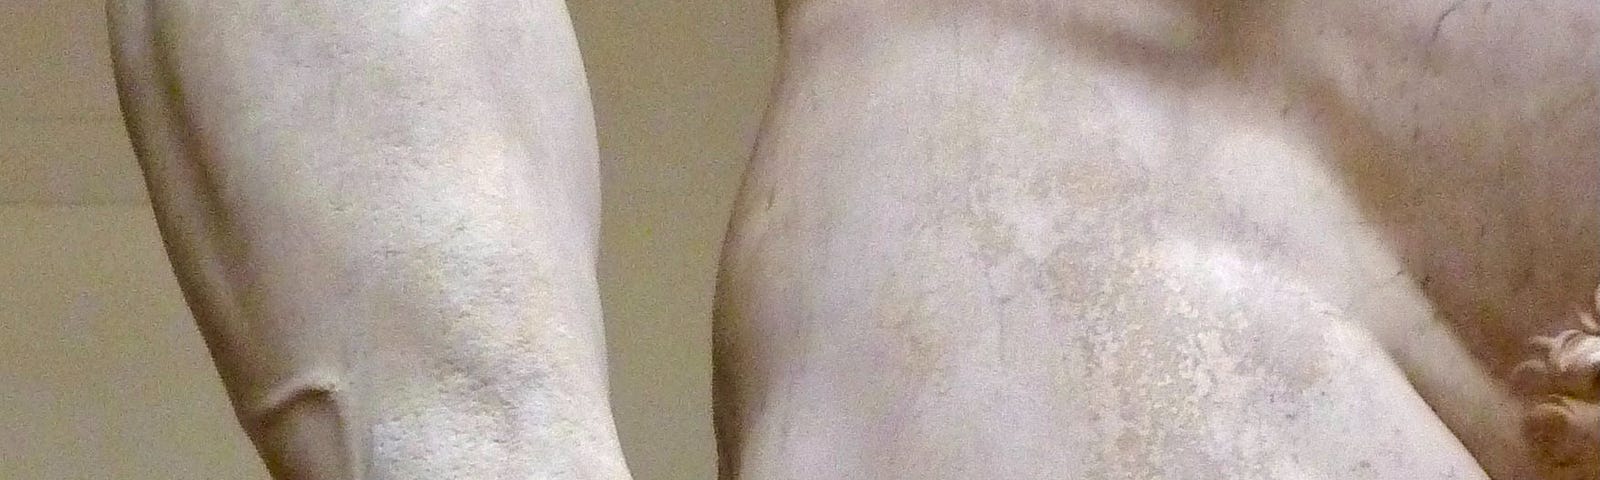 Arm and thigh of Michelangelo’s David.